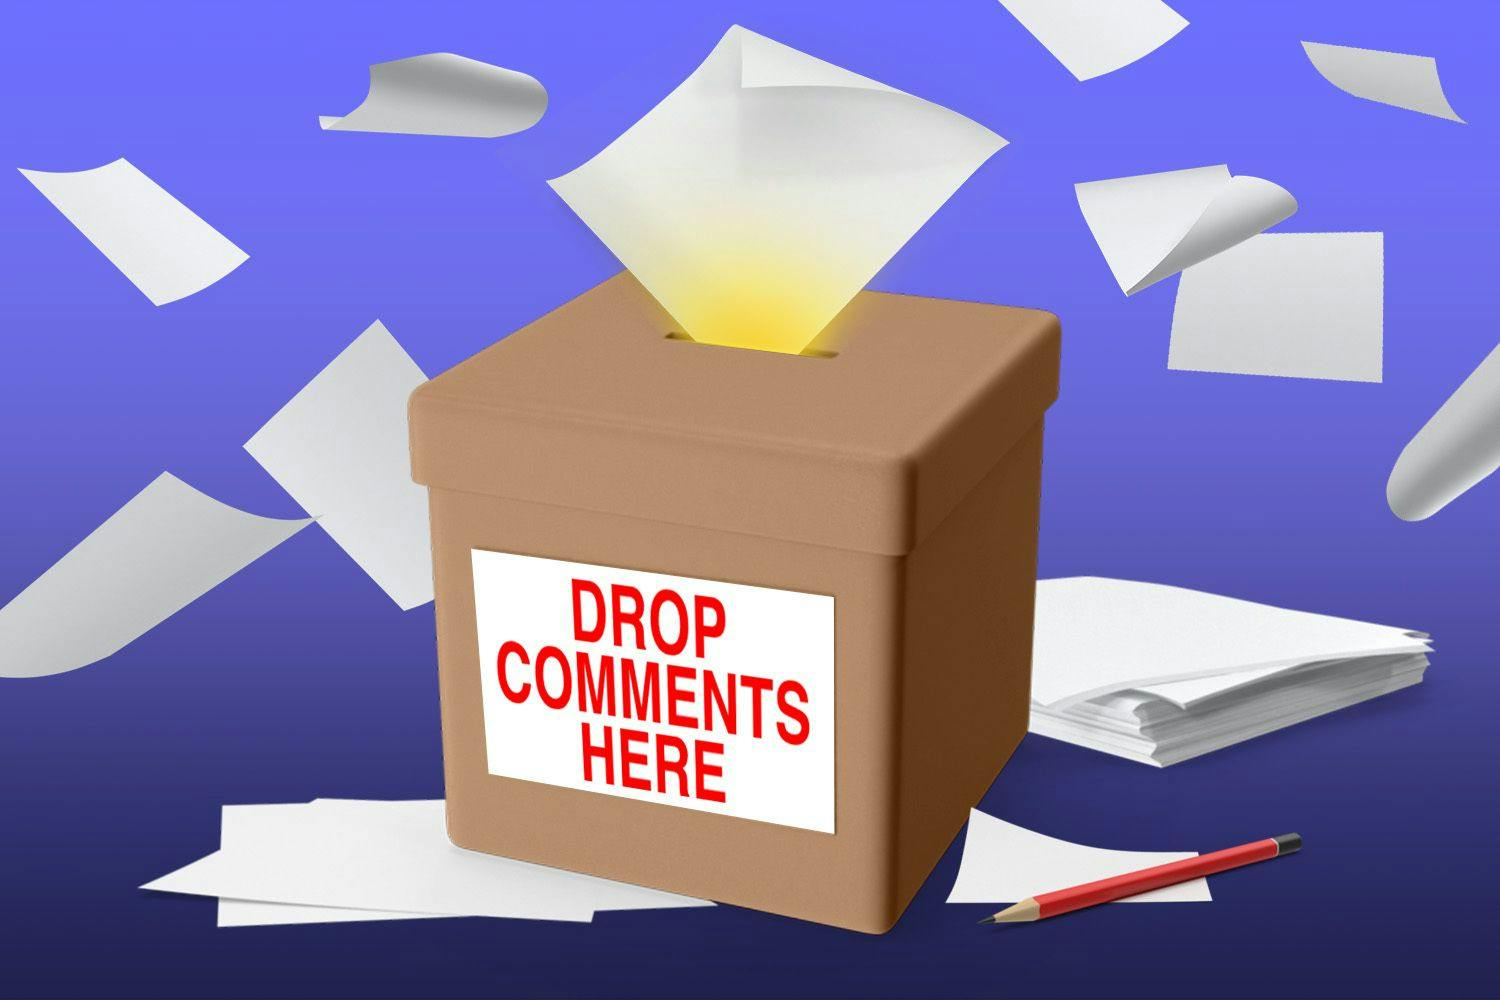 a box that says "Drop comments here"